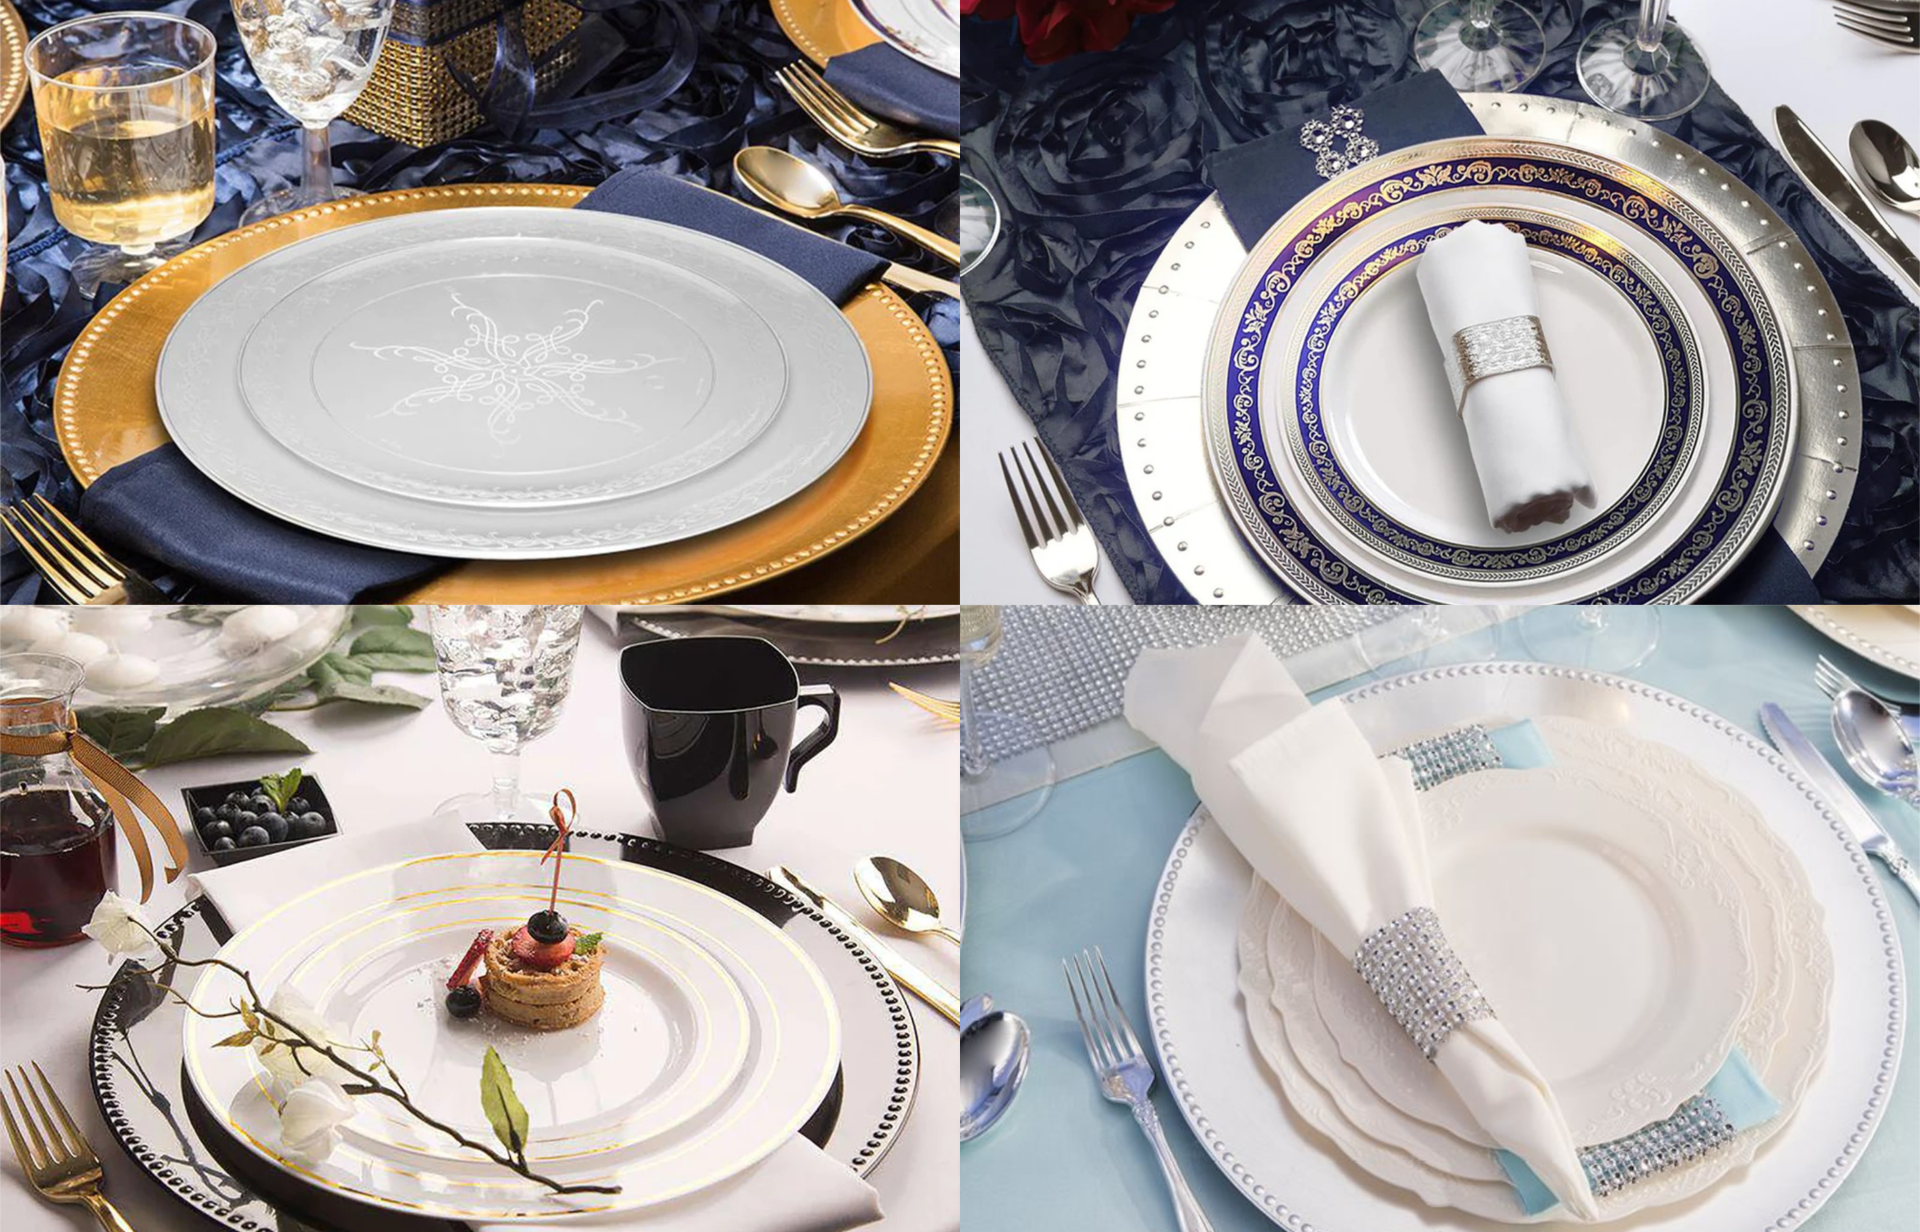 The Top 4 Place Setting Looks for a Sophisticated Table